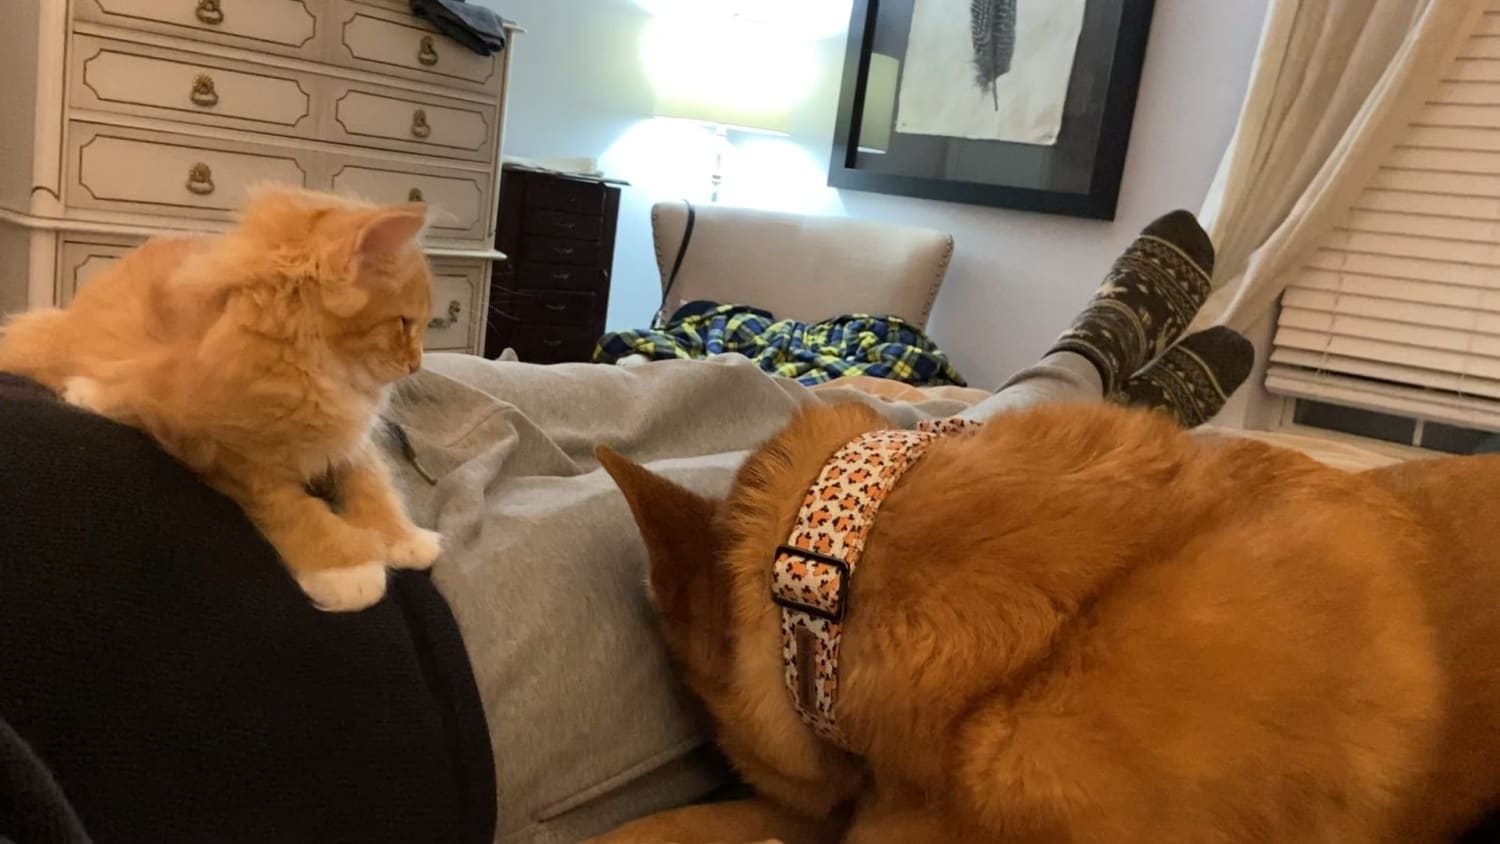 We brought a kitten home and our dog is confused.